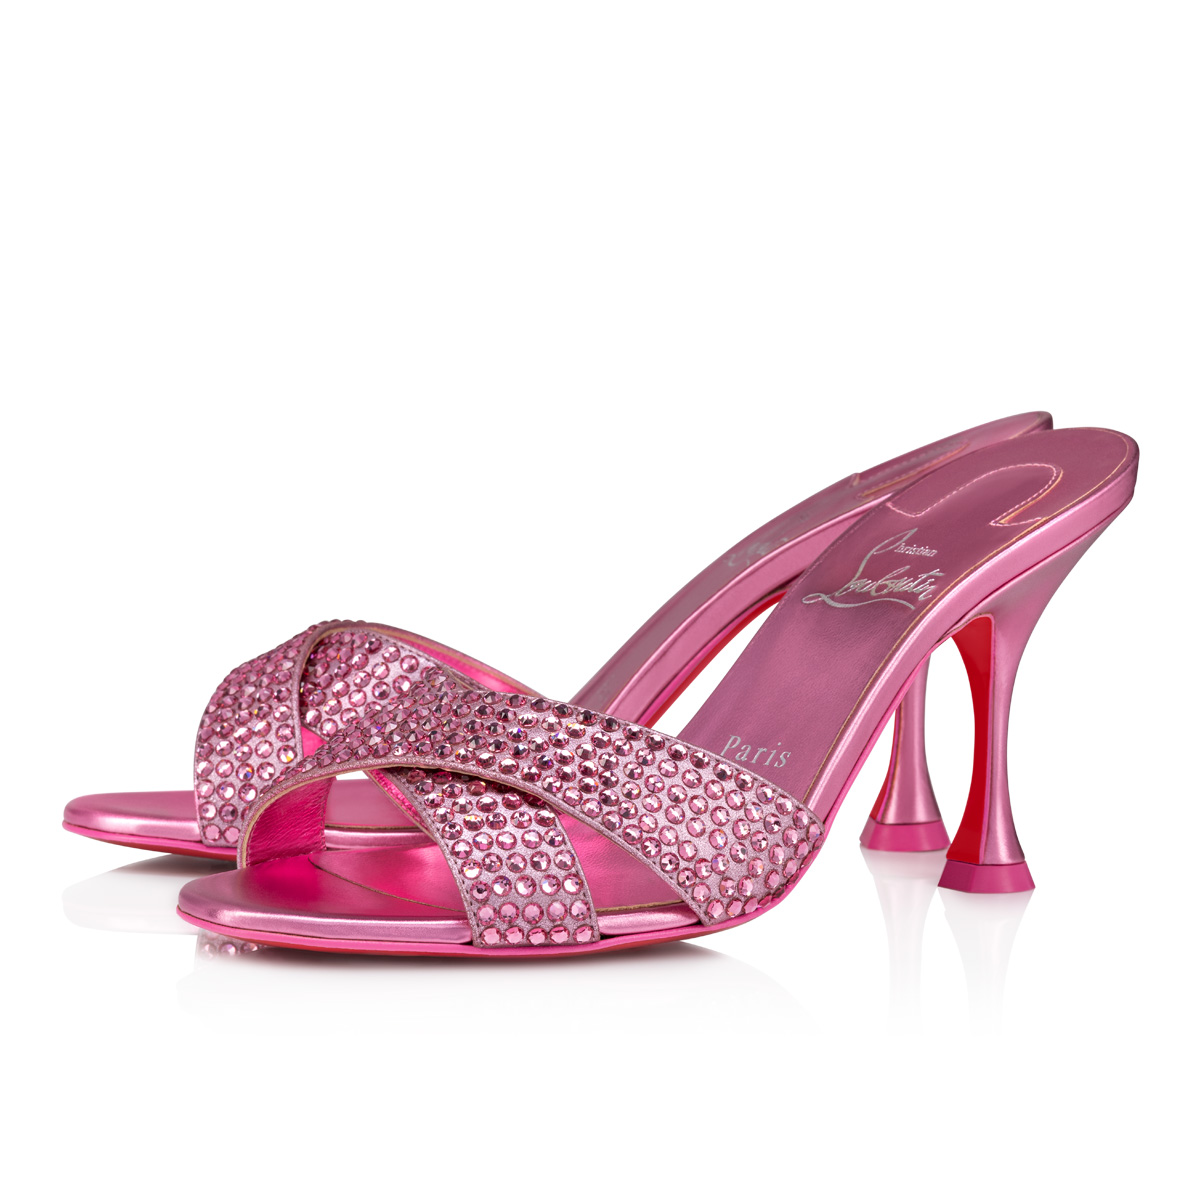 Christian Louboutin US 8.5 Sandals pink red sole high heels